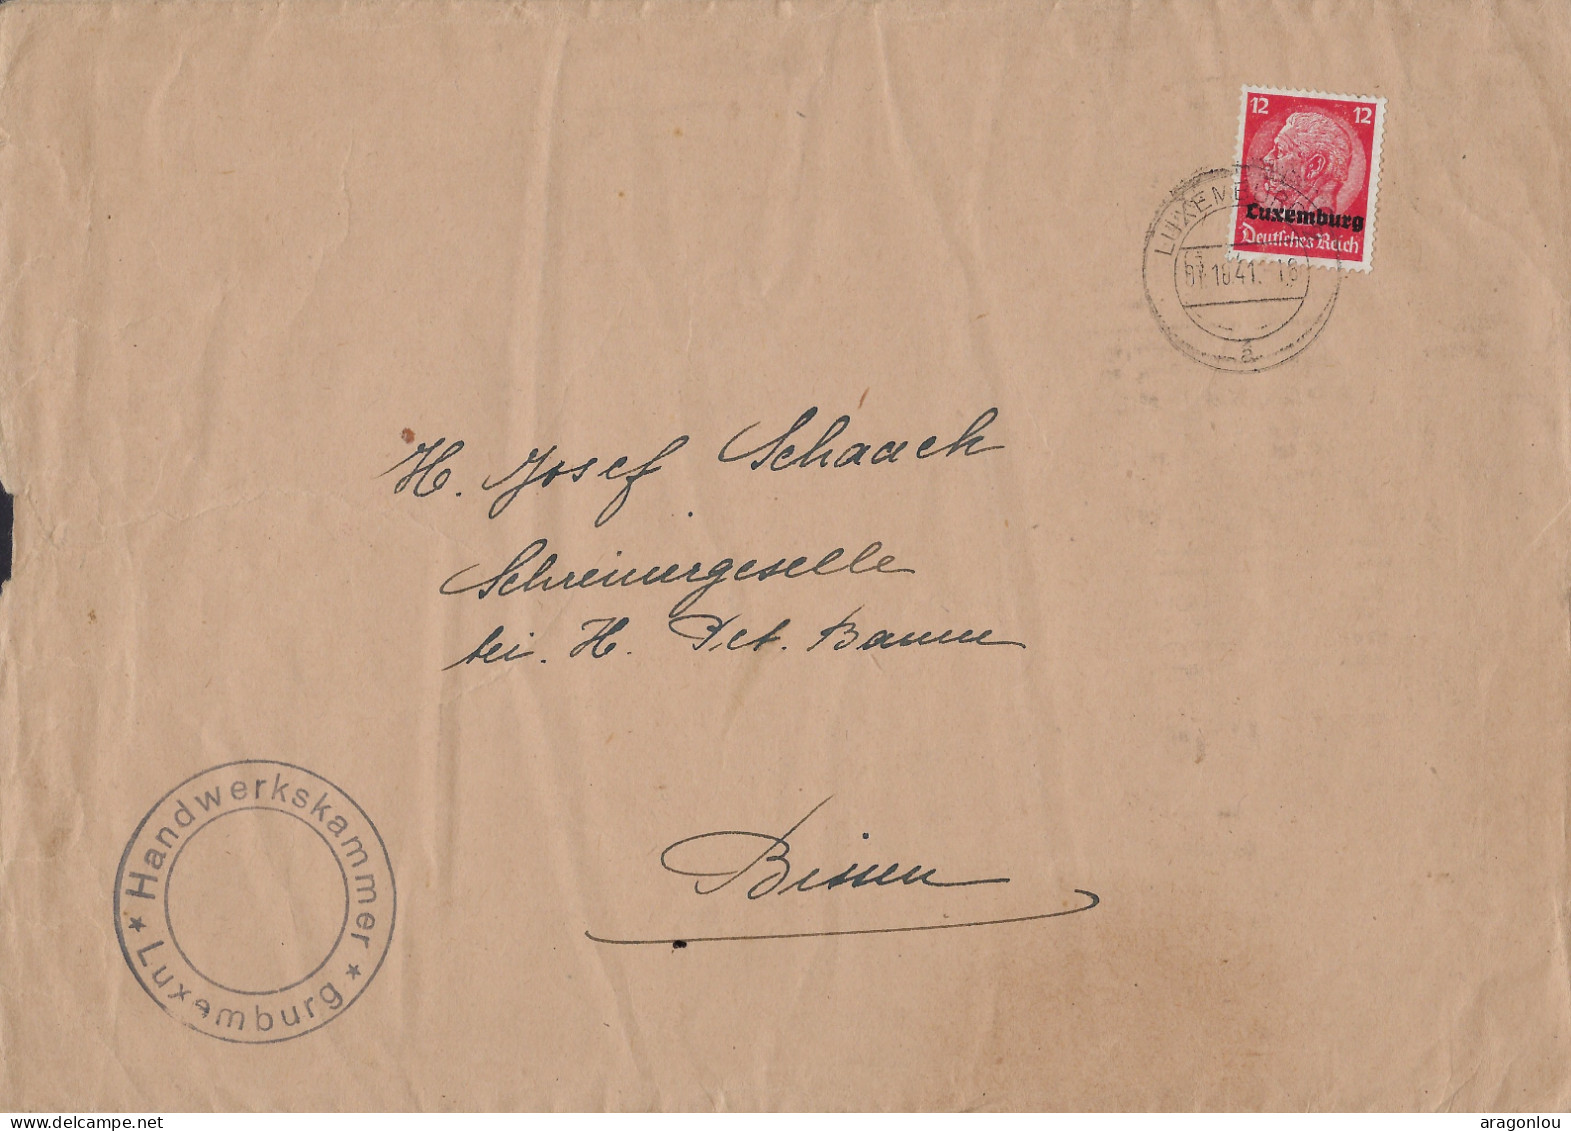 Luxembourg - Luxemburg -   Lettre  Occupation   1941 - 1940-1944 Occupation Allemande